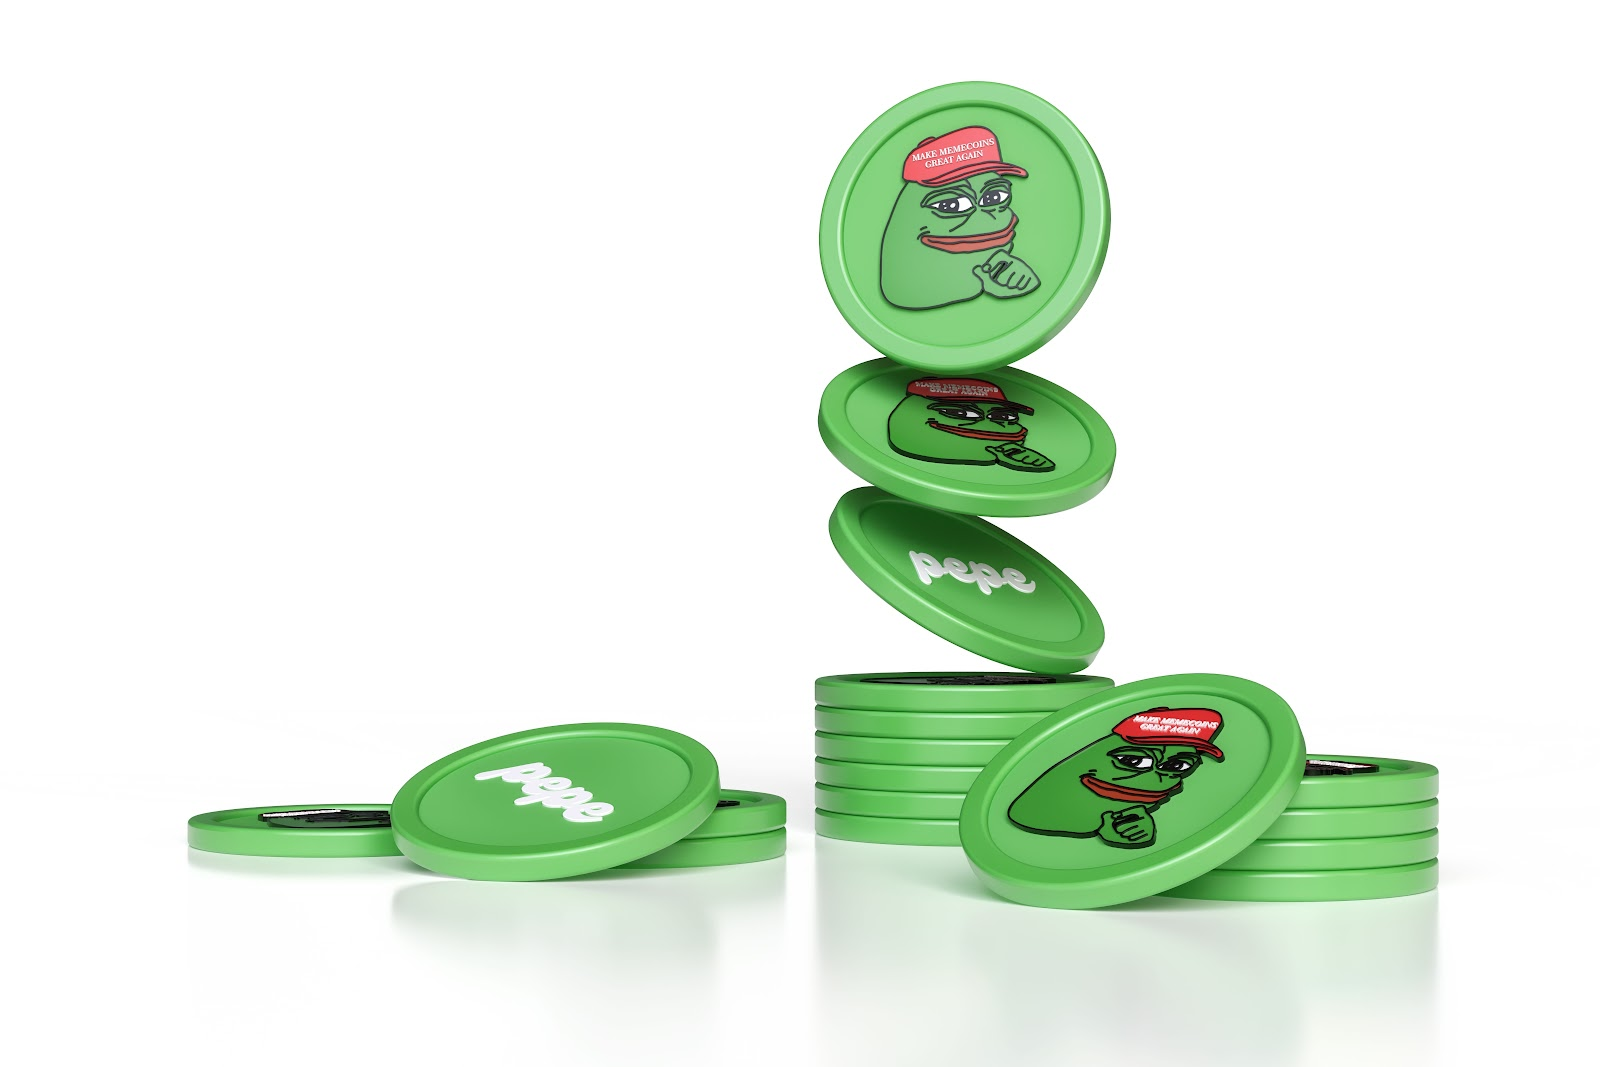 New Meme Coin Hits $1 Million in ICO, Will This Be The Next Pepe or Bonk?